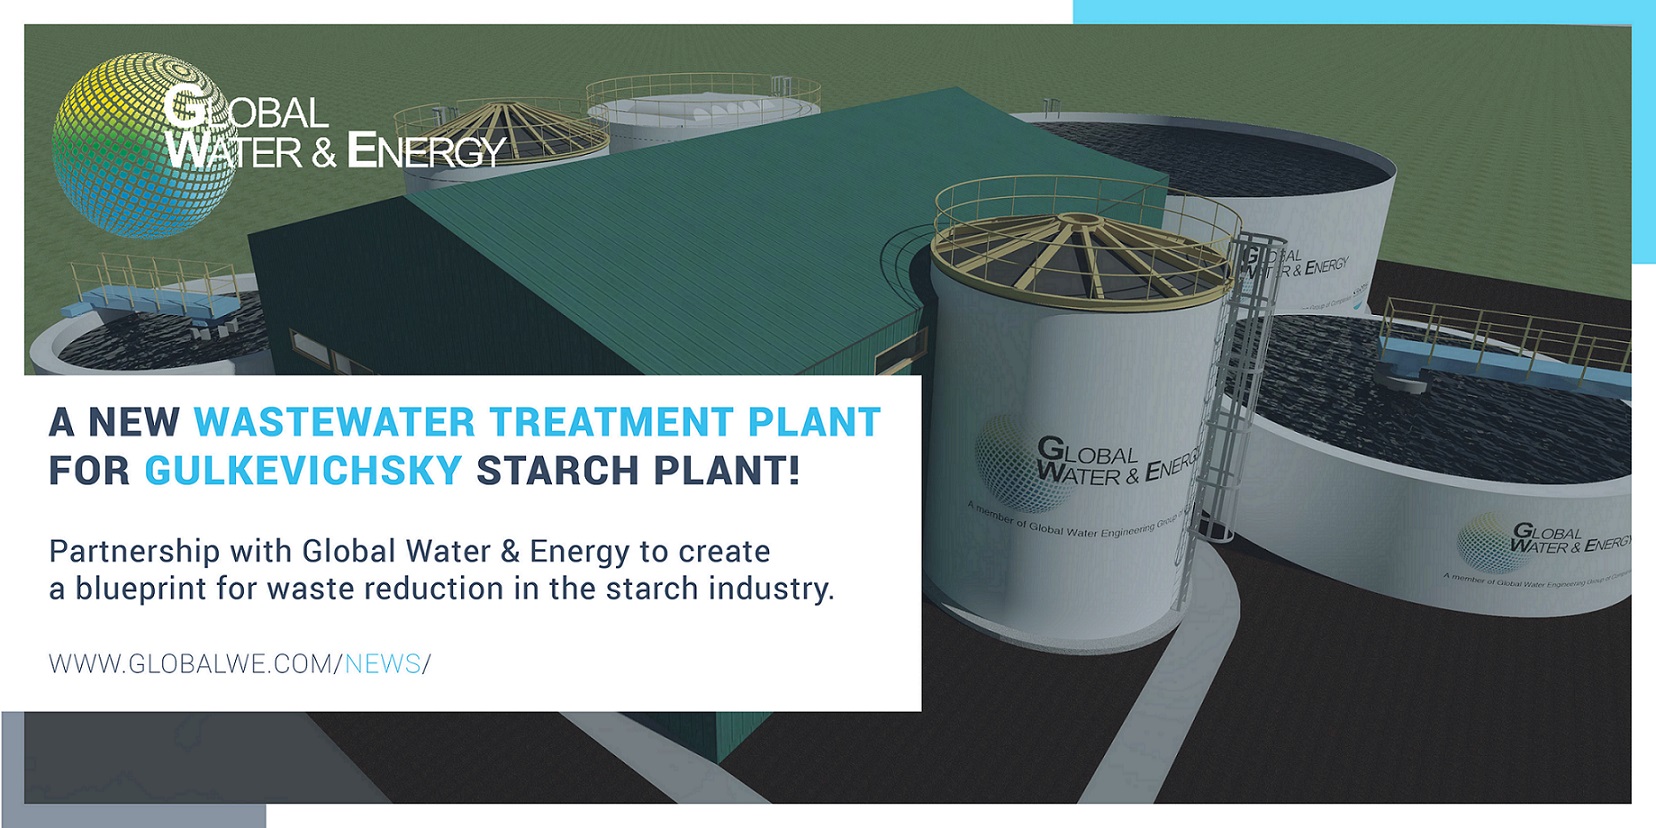 Gulkevichsky Starch Factory – Global Water & Energy to create a blueprint for waste reduction